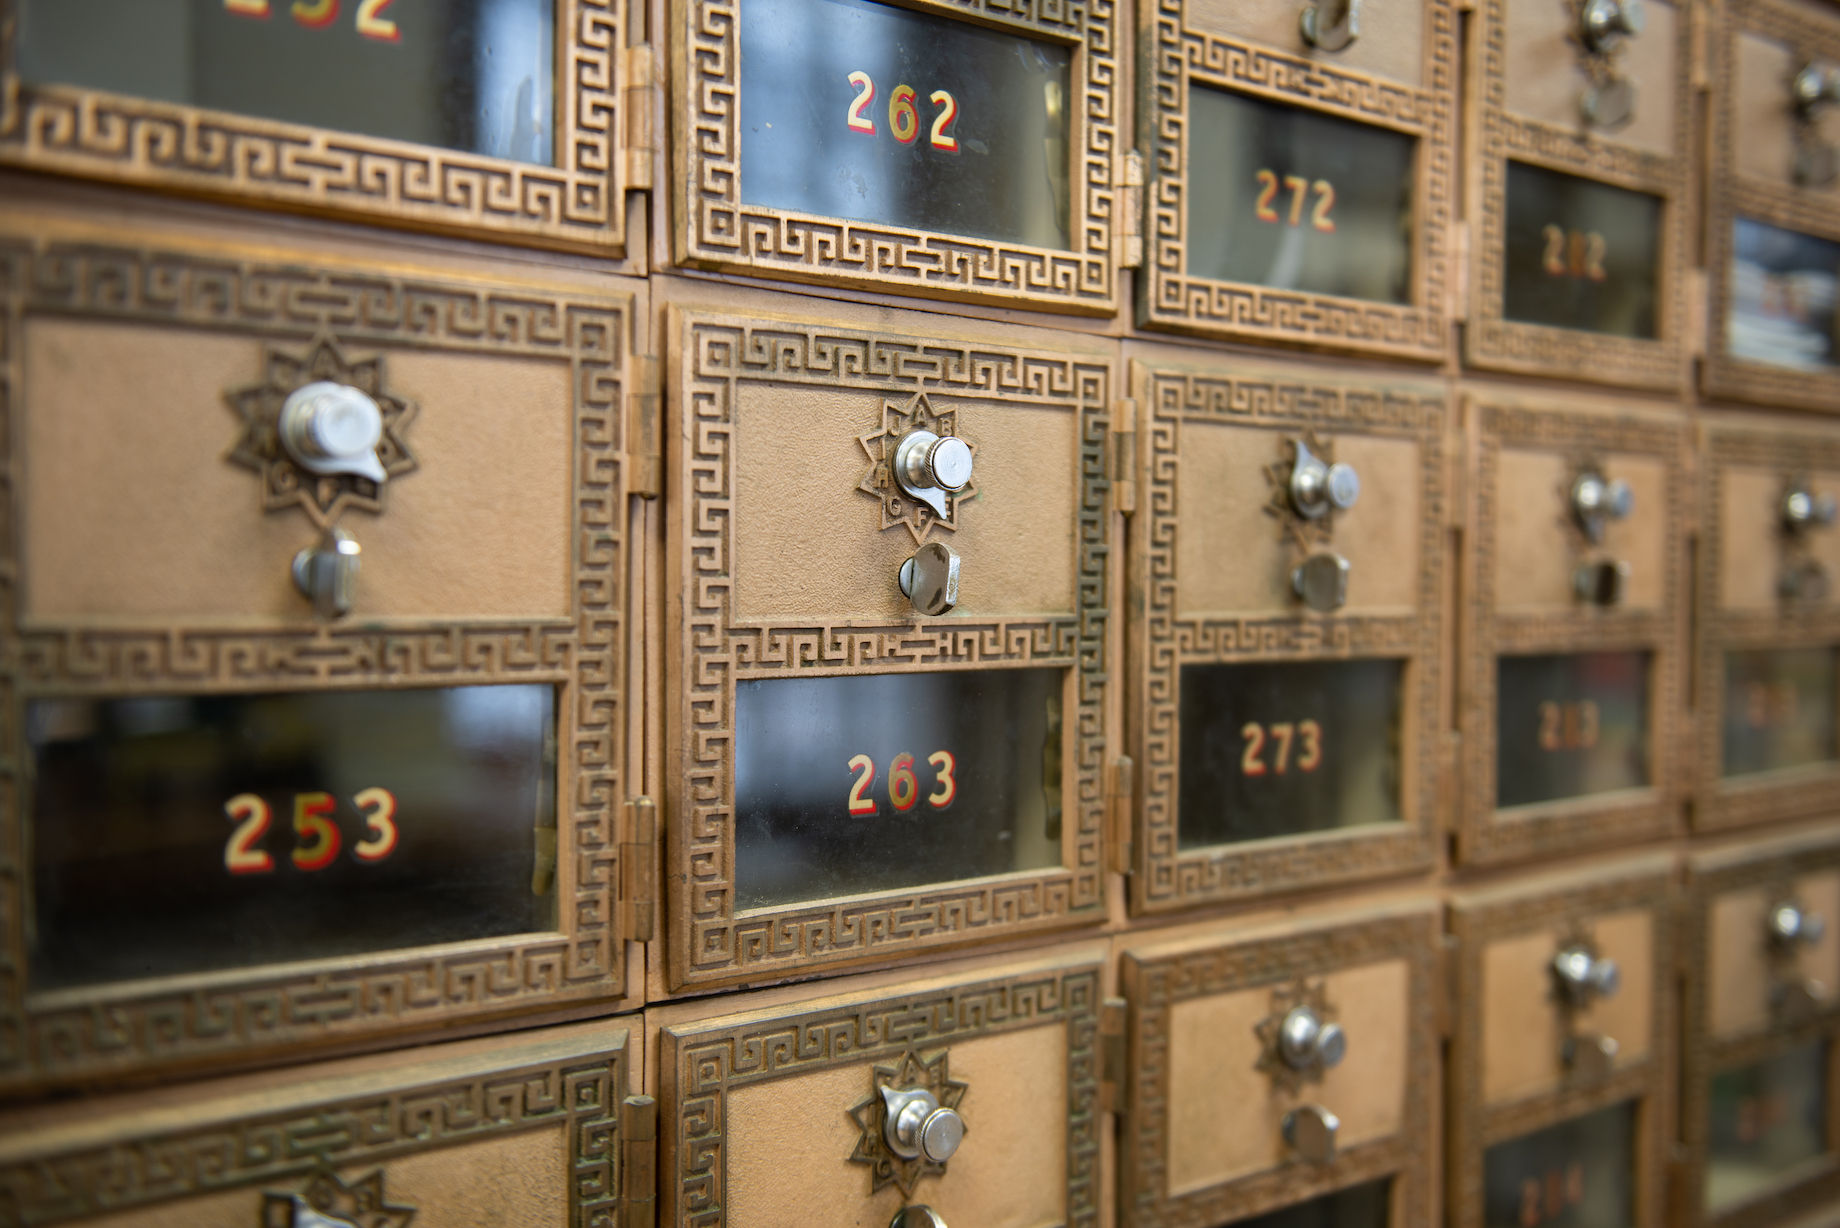 How Much is a PO Box?